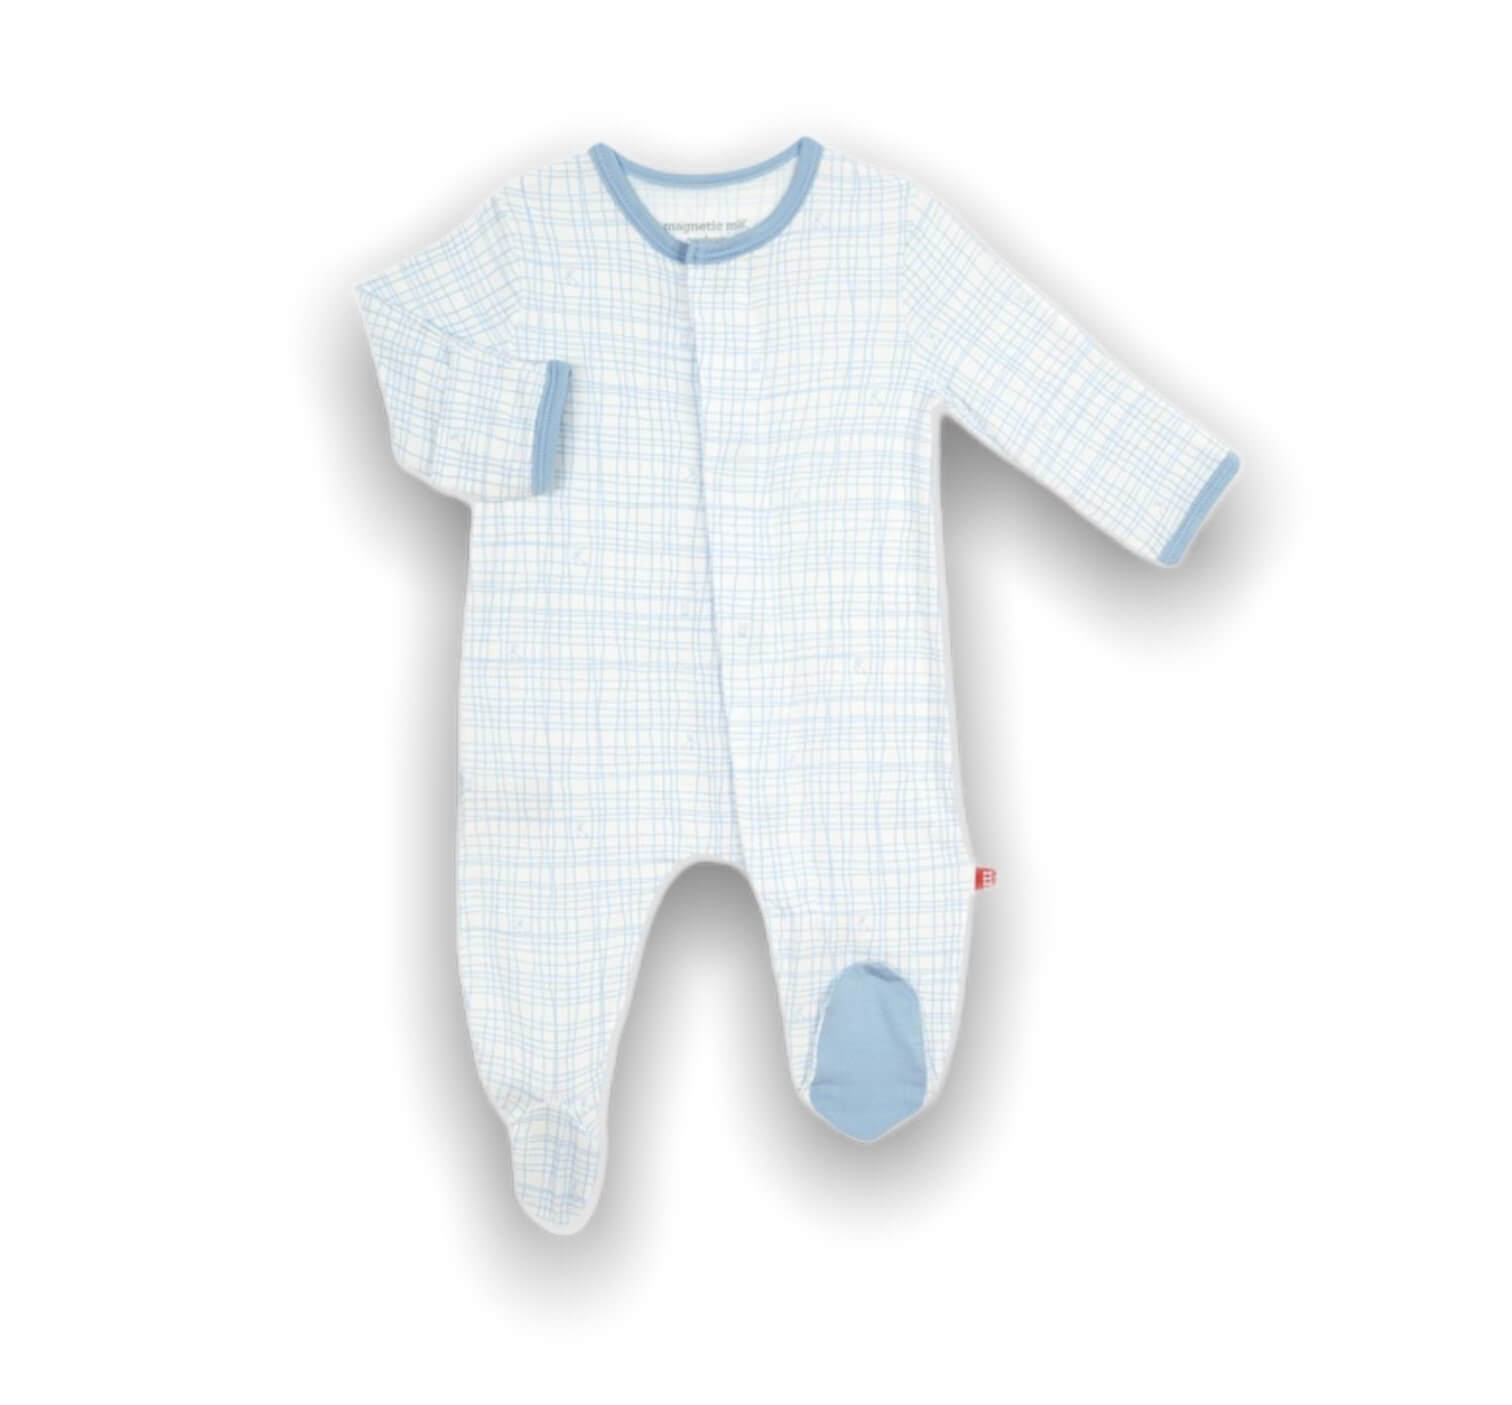 white footie with blue plaid all over, blue on bottom of feet, blue trim on sleeves and neck